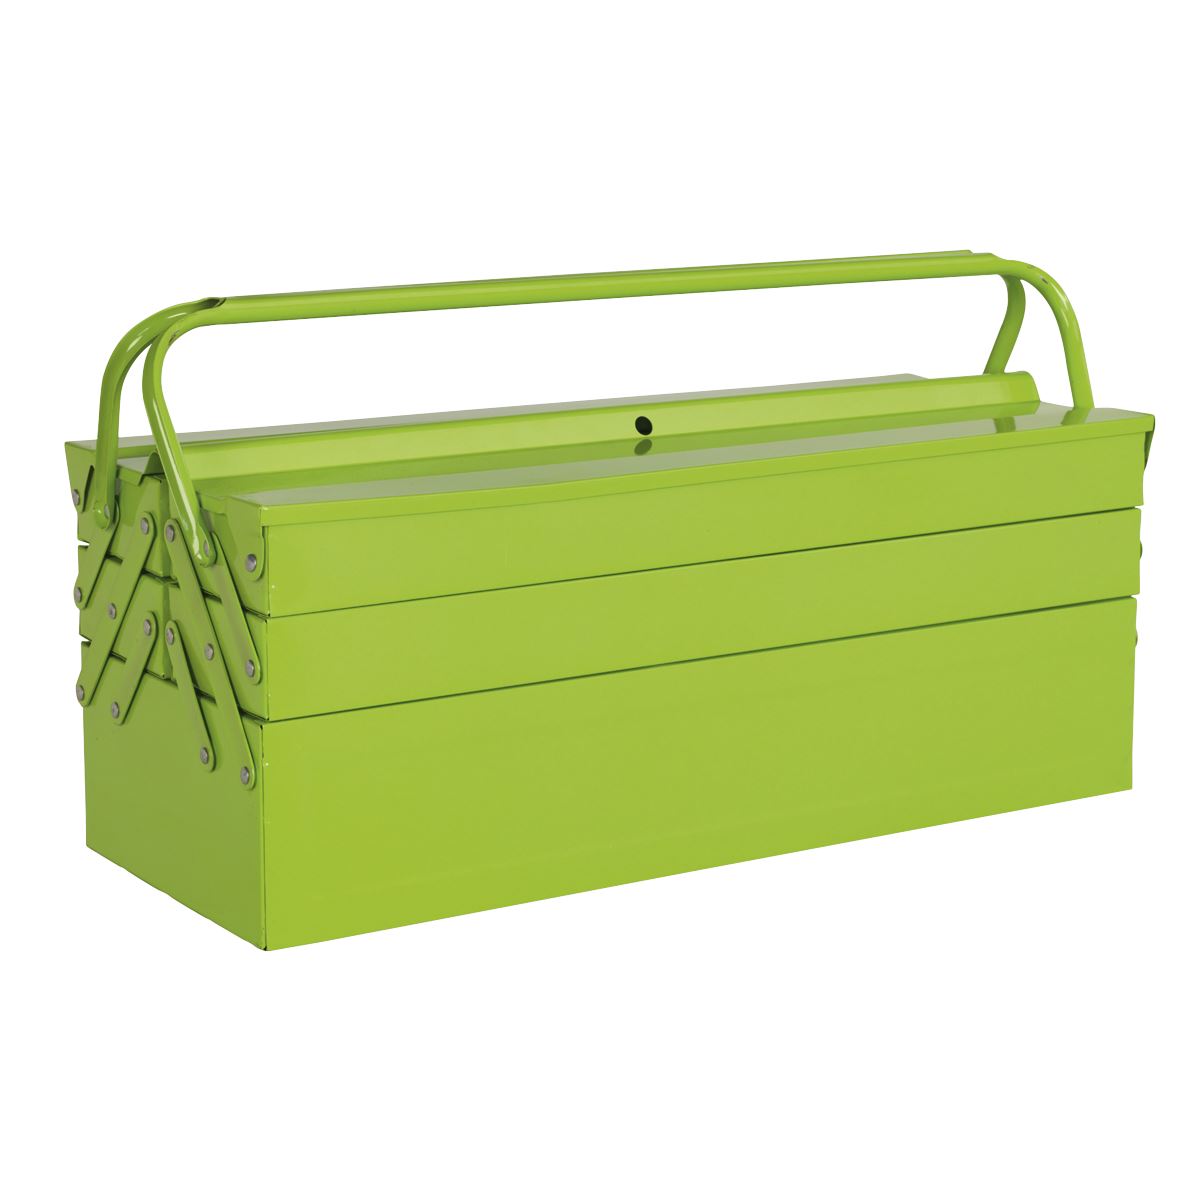 Sealey Cantilever Toolbox 4 Tray 530mm Green